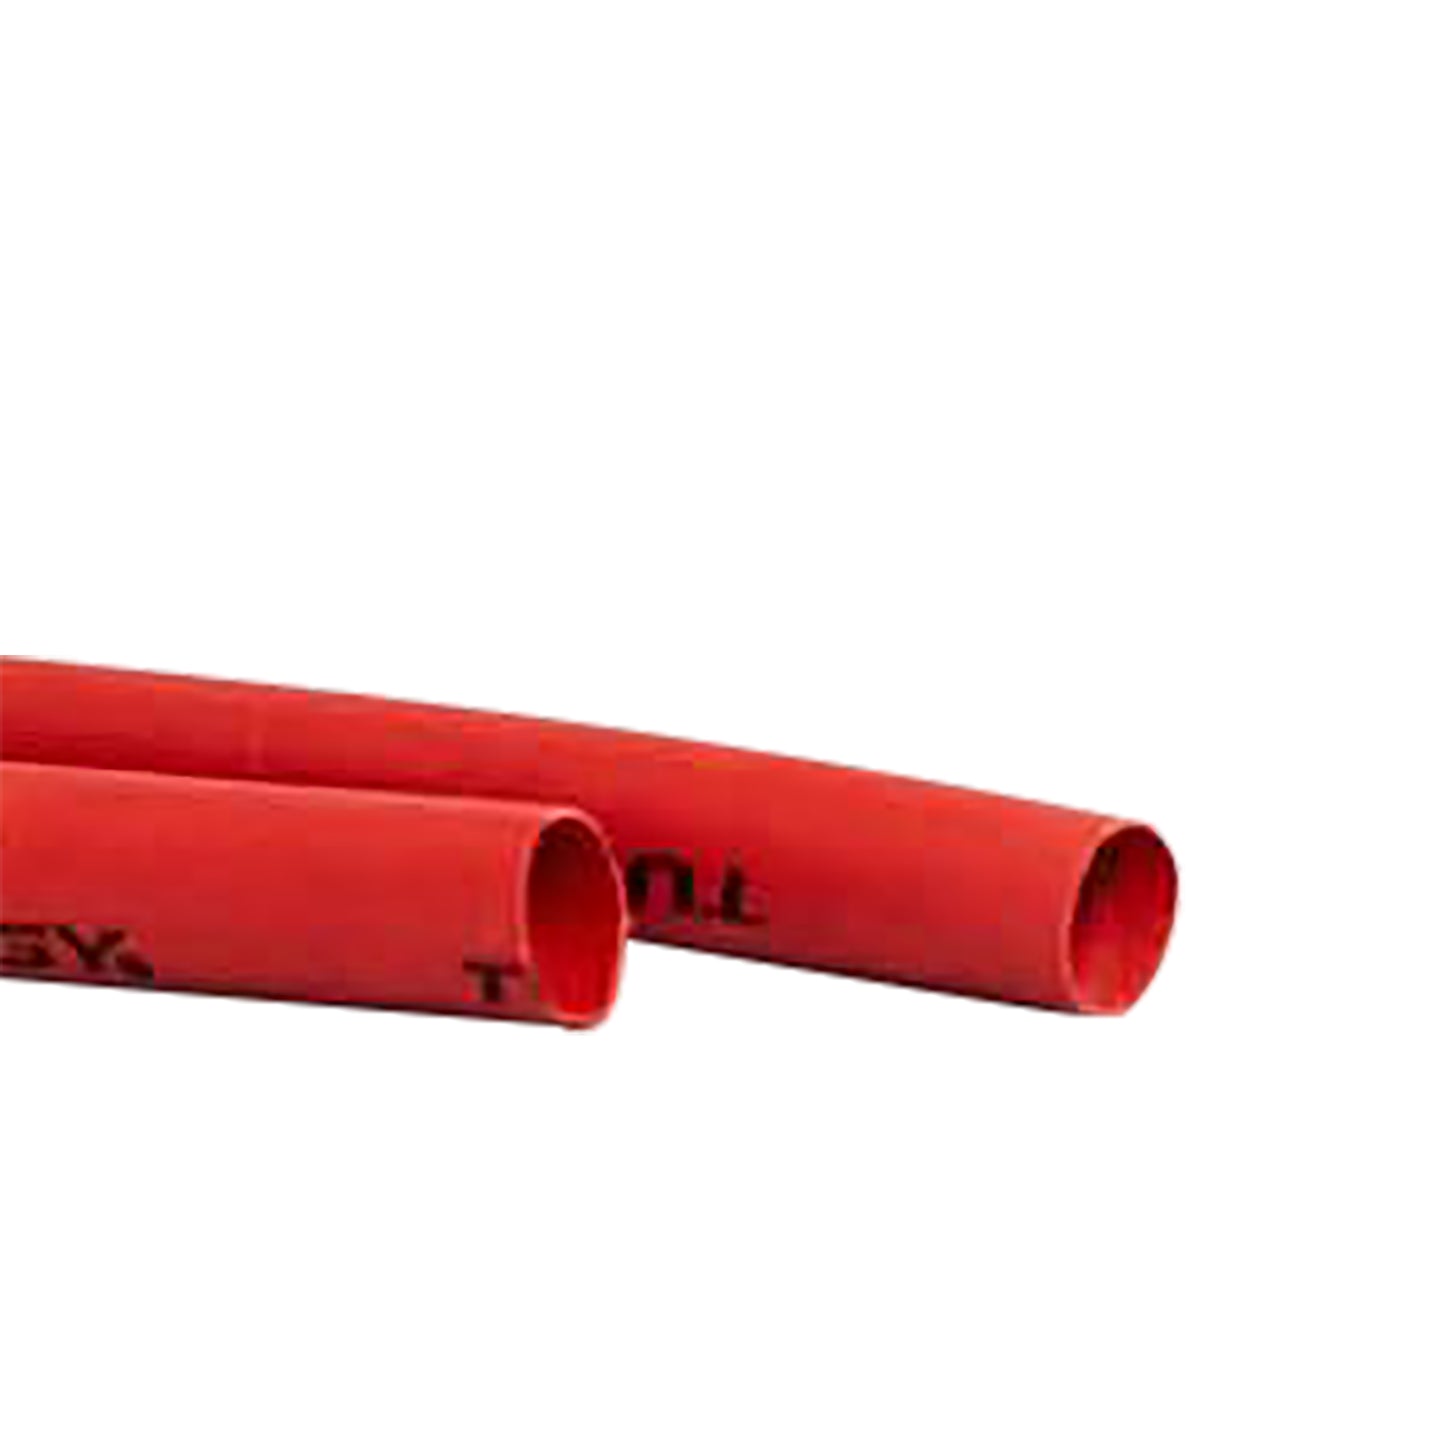 Flexible Thin Single Wall Non-Adhesive Heat Shrink Tubing 2:1 Red 1/4" ID - 48" Inch 4 Pack